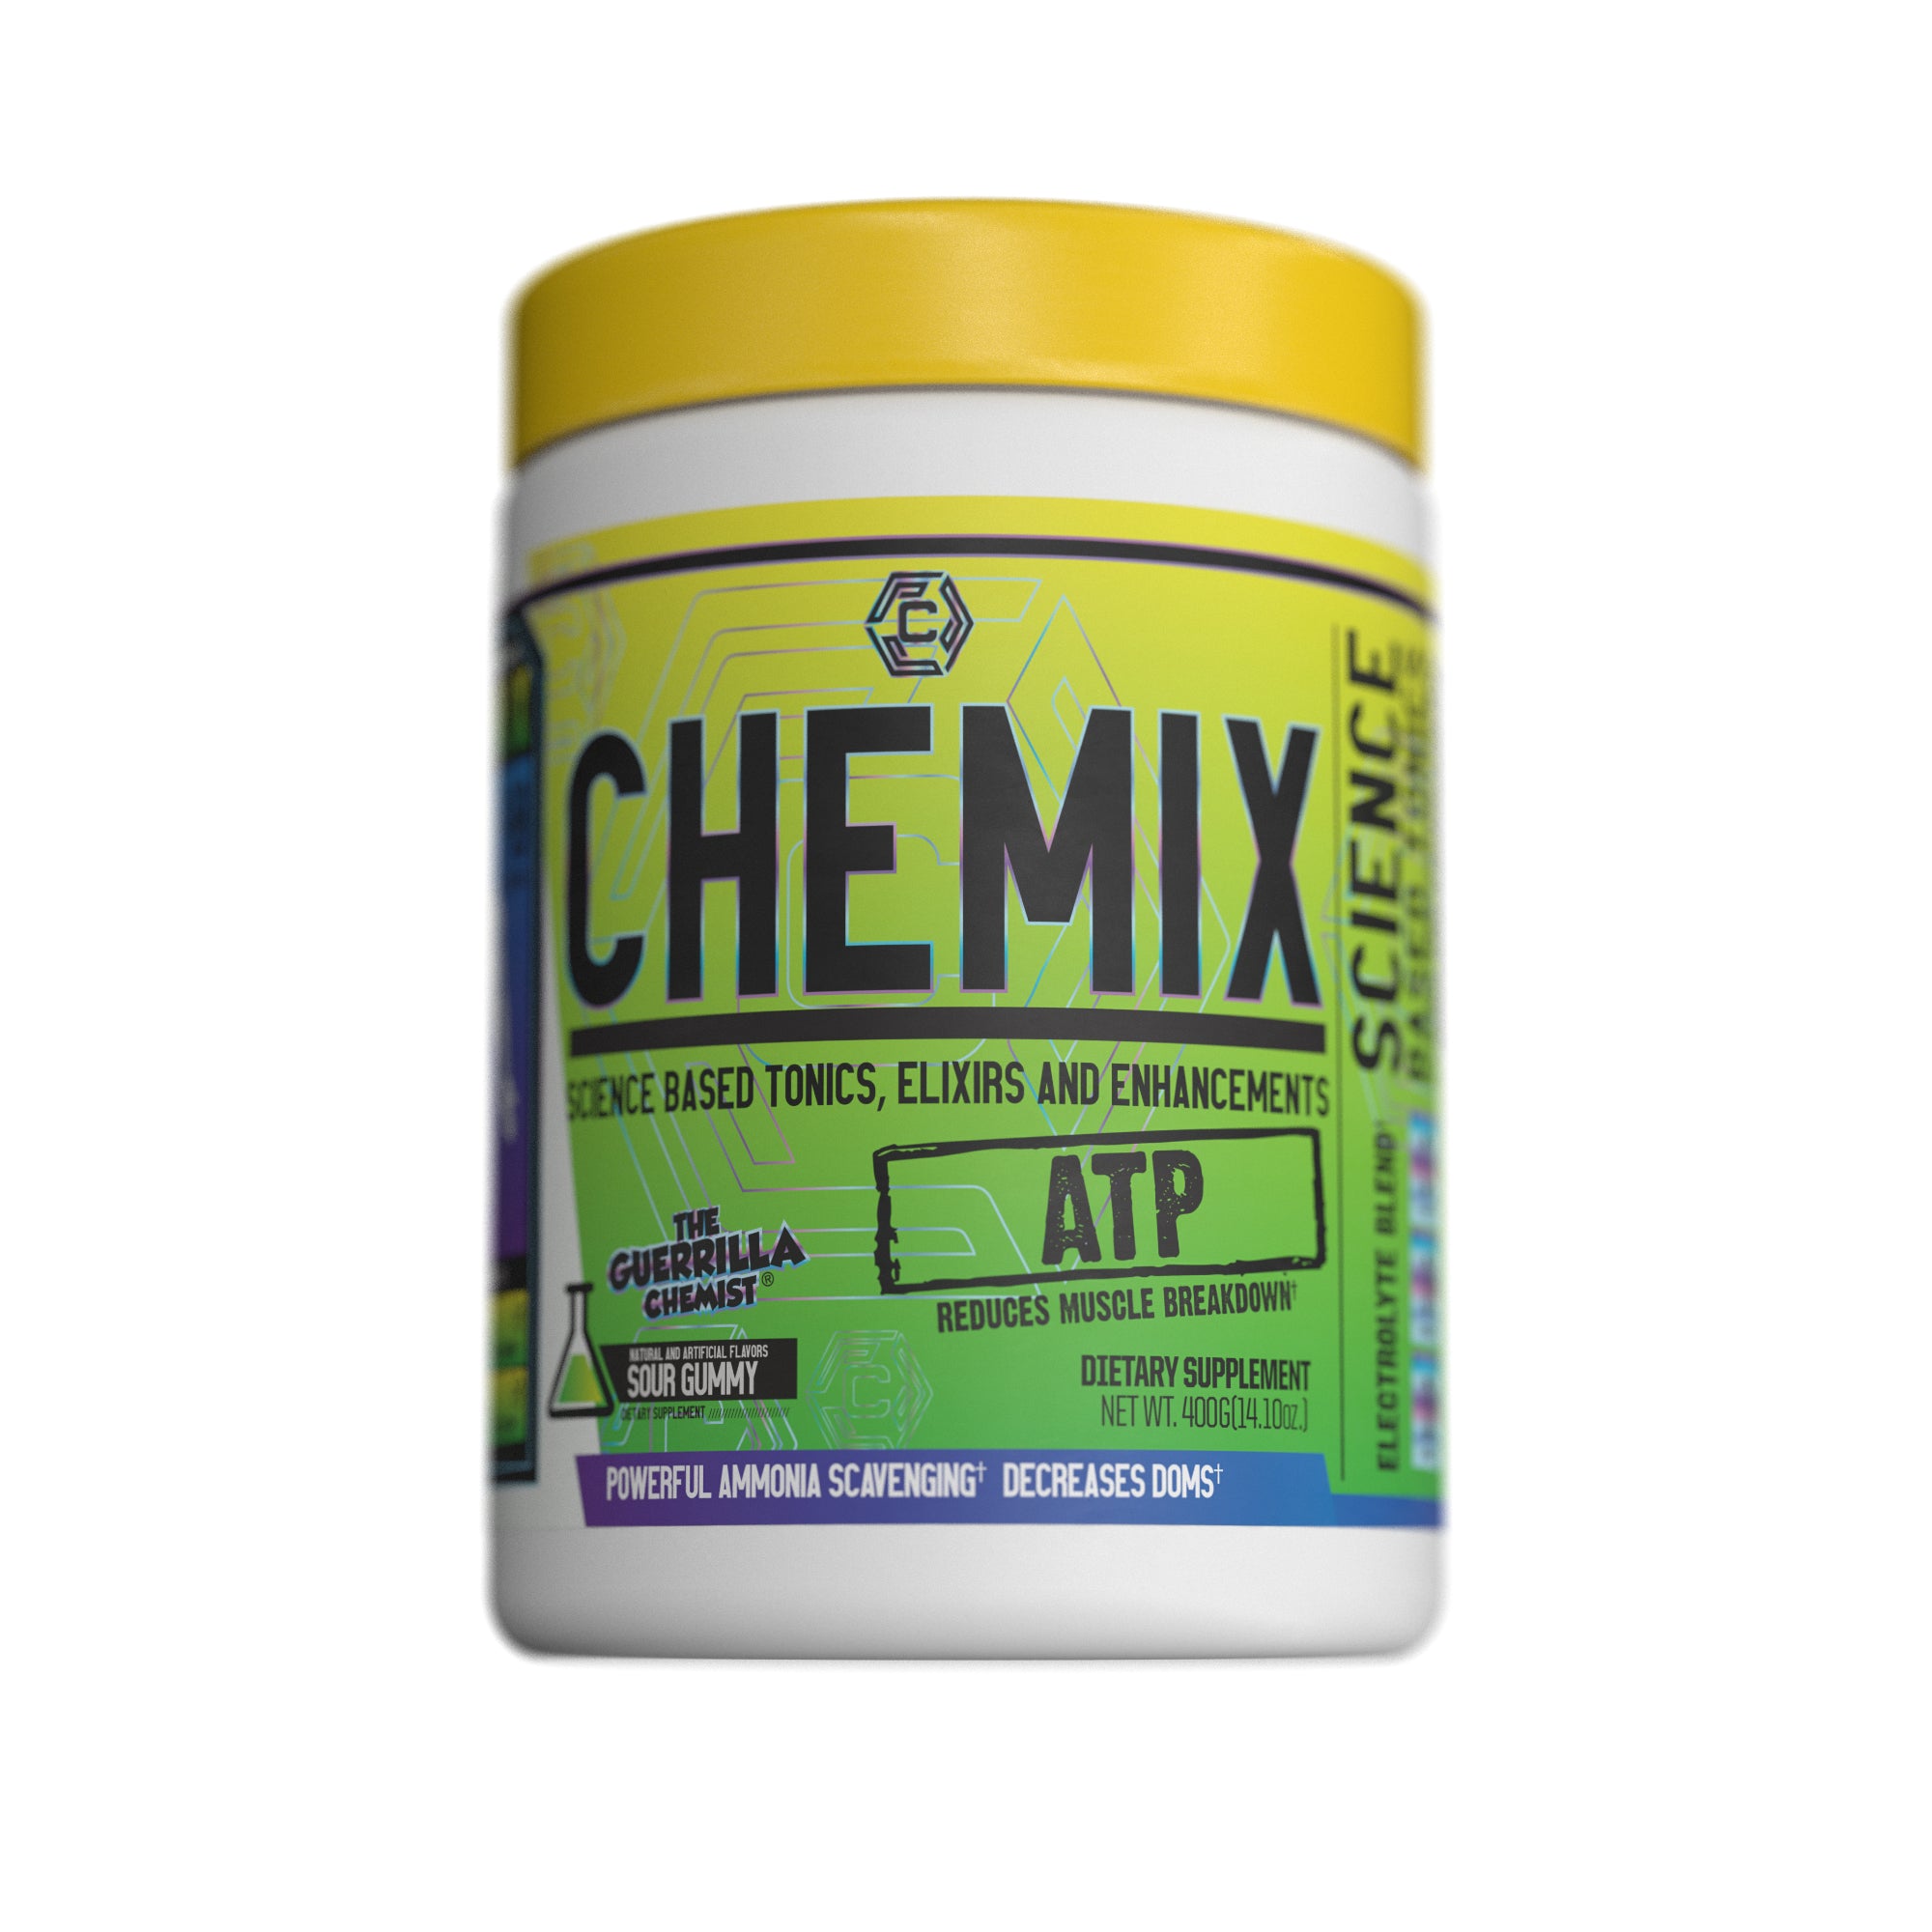 CHEMIX LIMITED EDITION GLOW IN THE DARK SHAKER CUP - Chemix Lifestyle